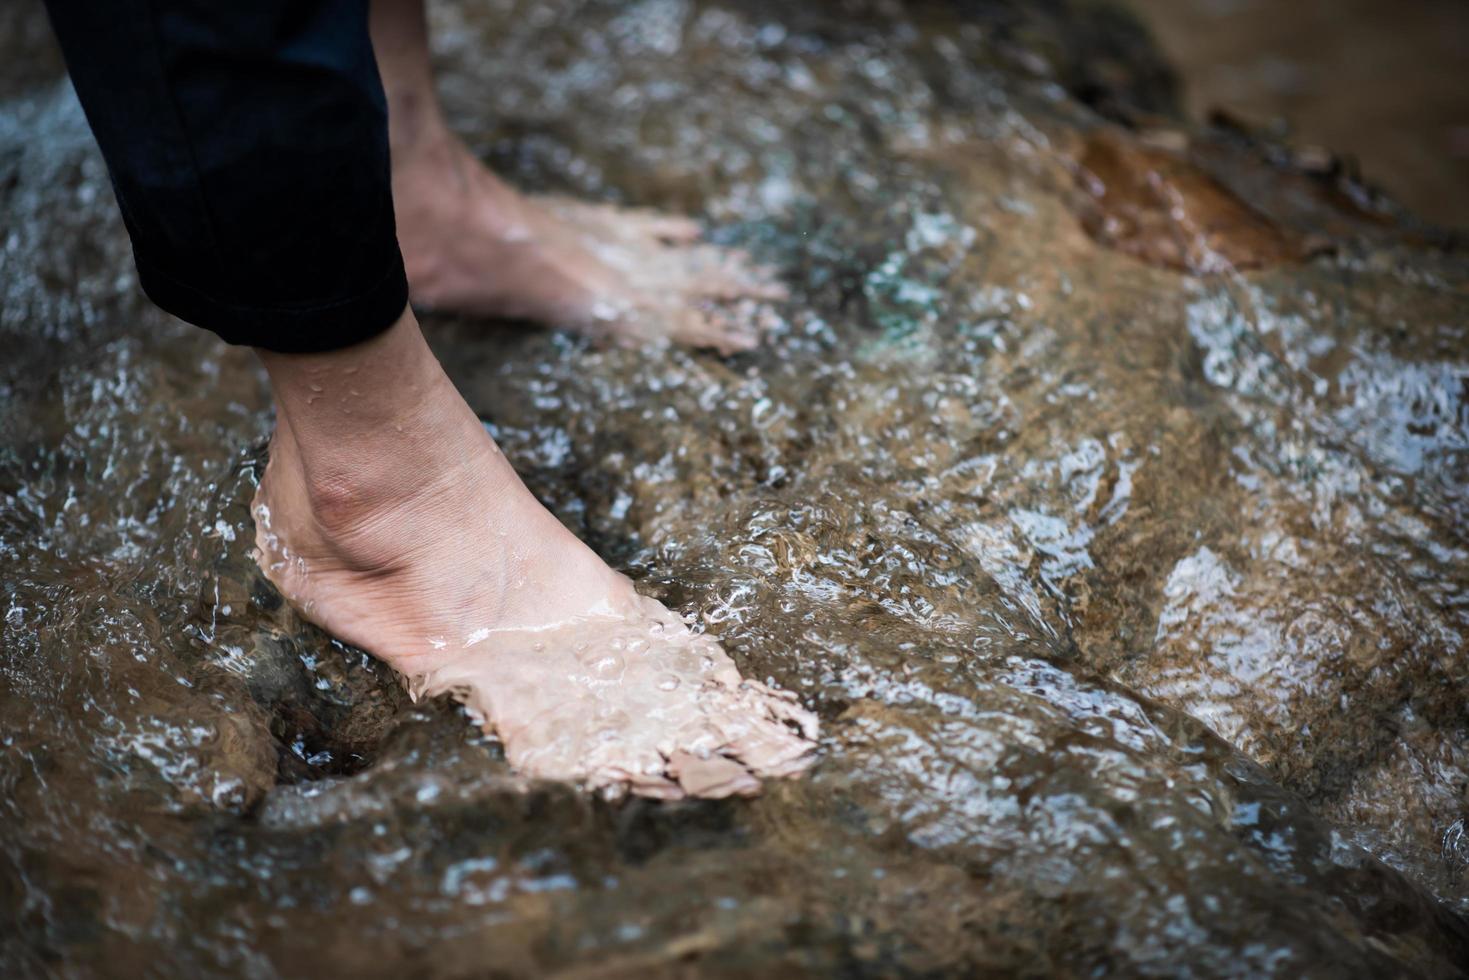 Feet being cooled down by river water photo